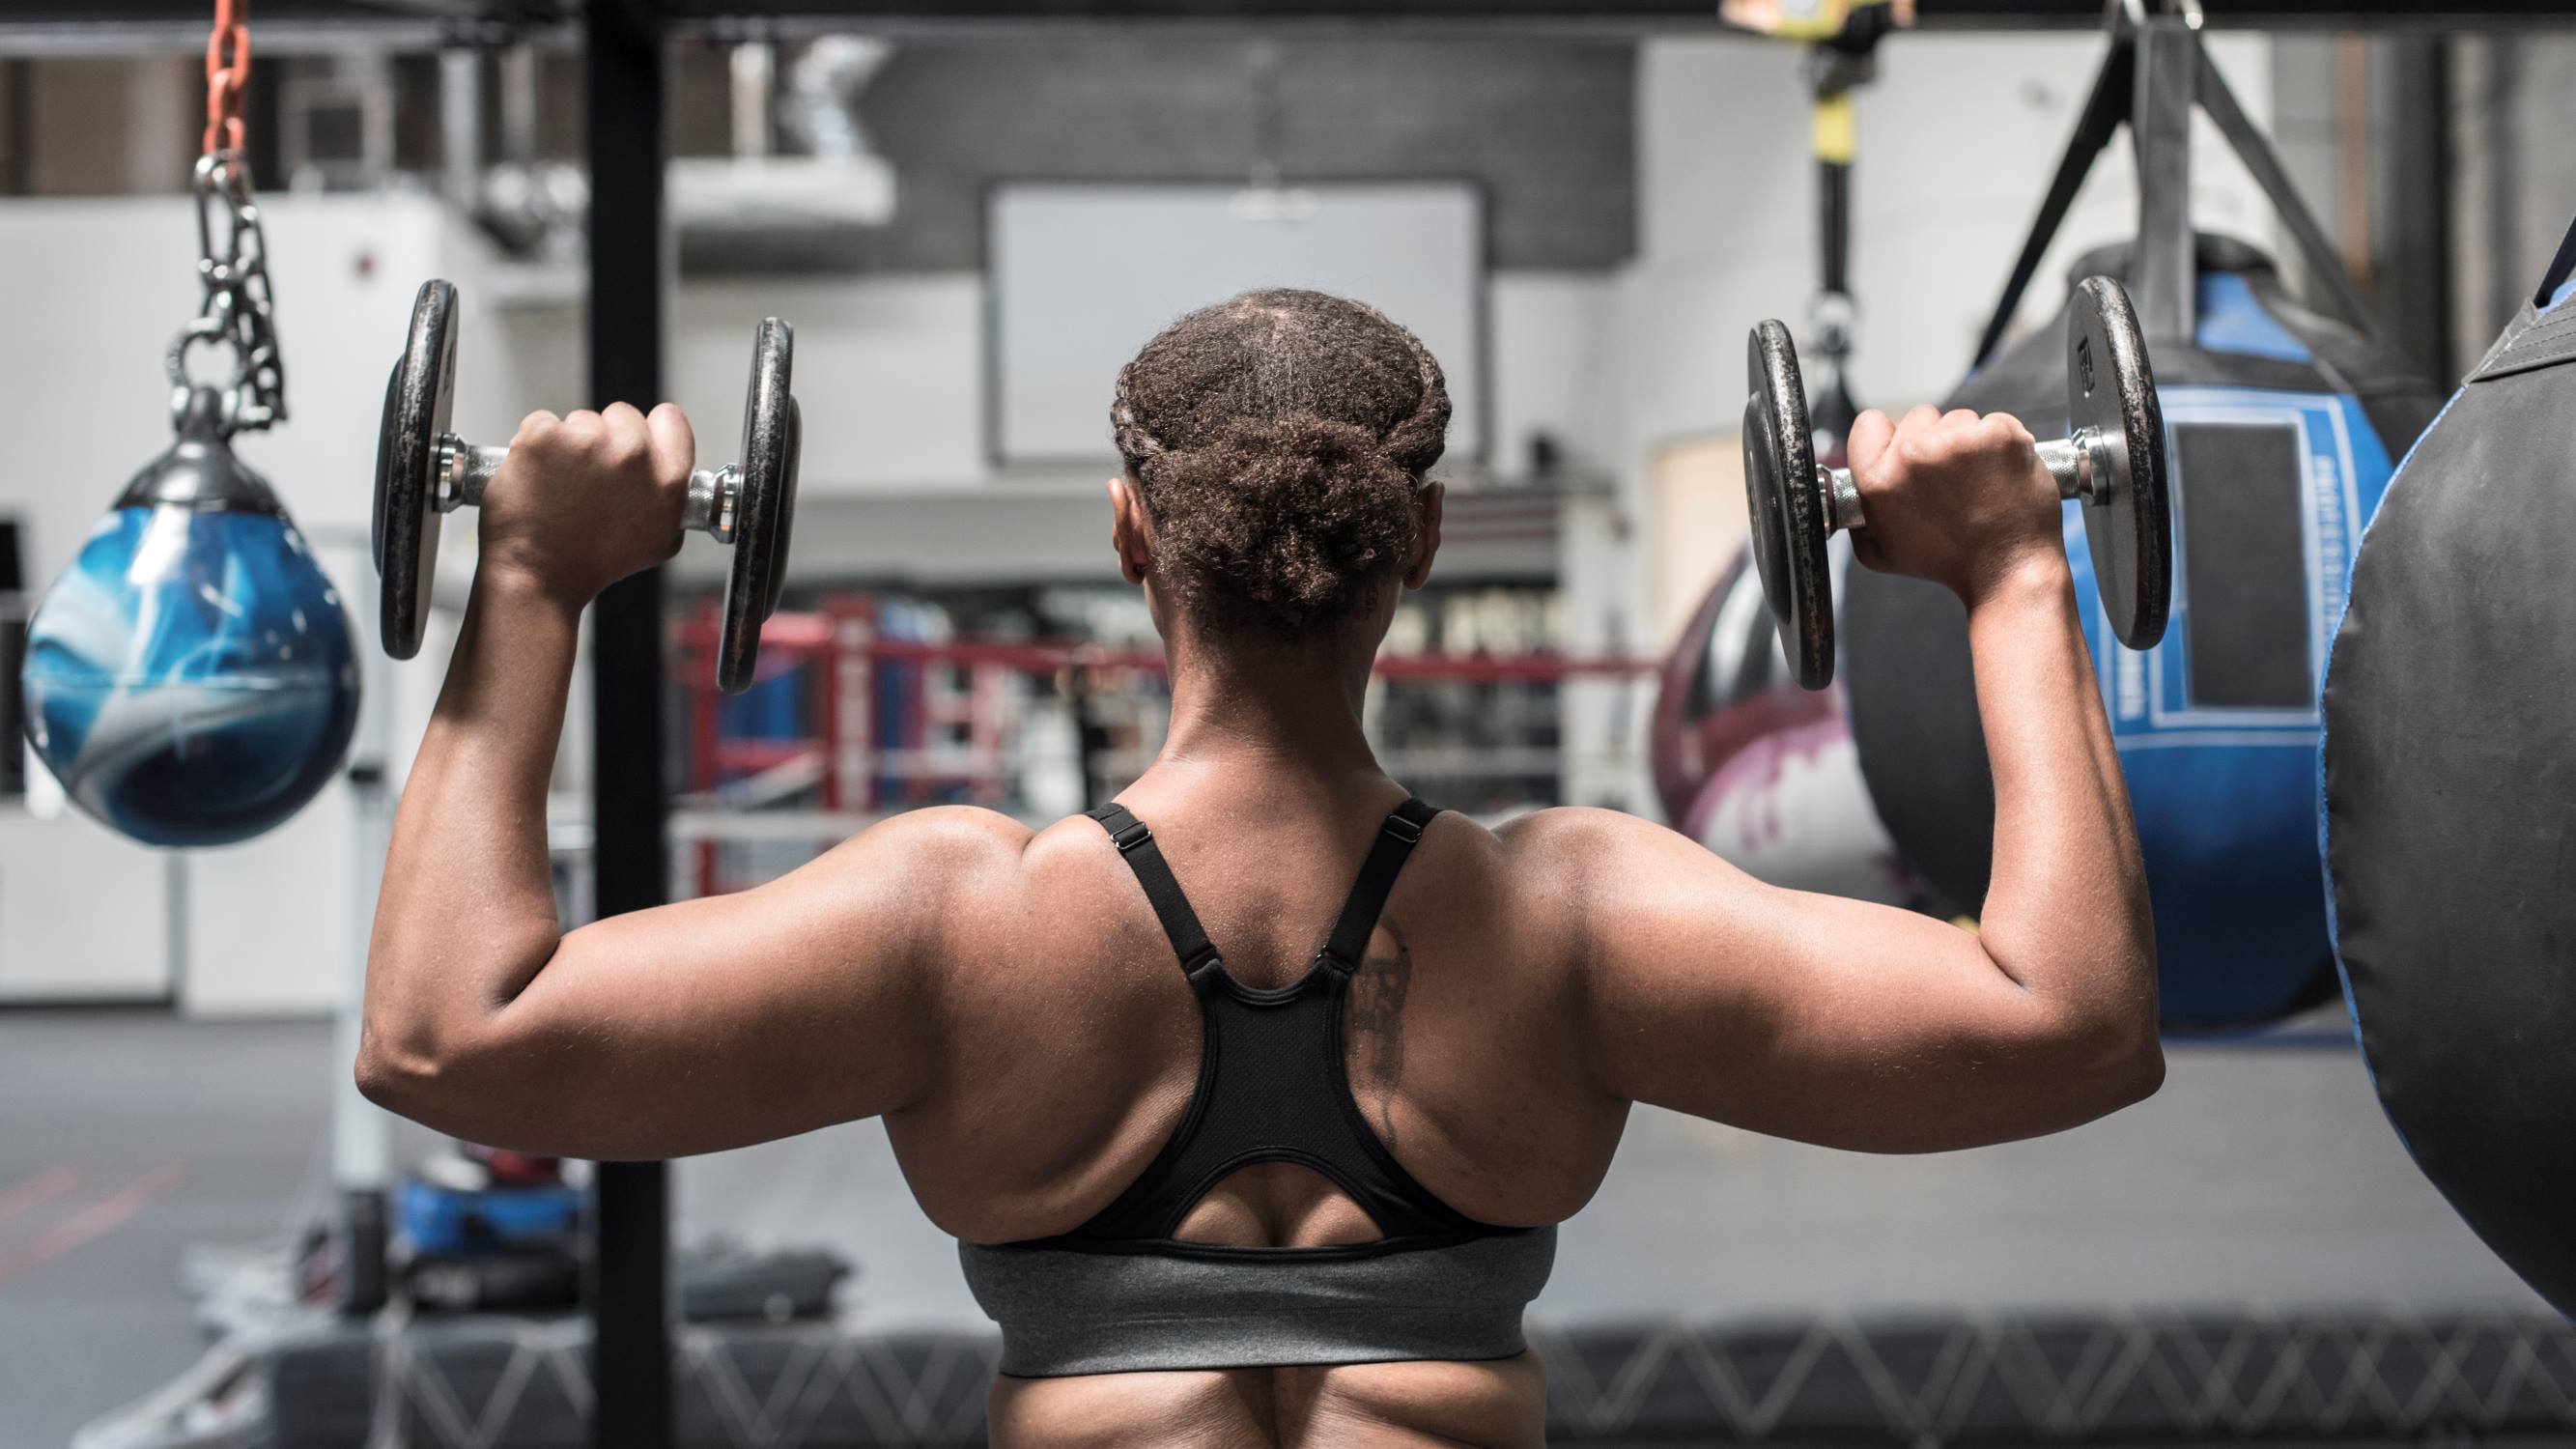 How Should You Lift If You Want To Increase Muscular Endurance?